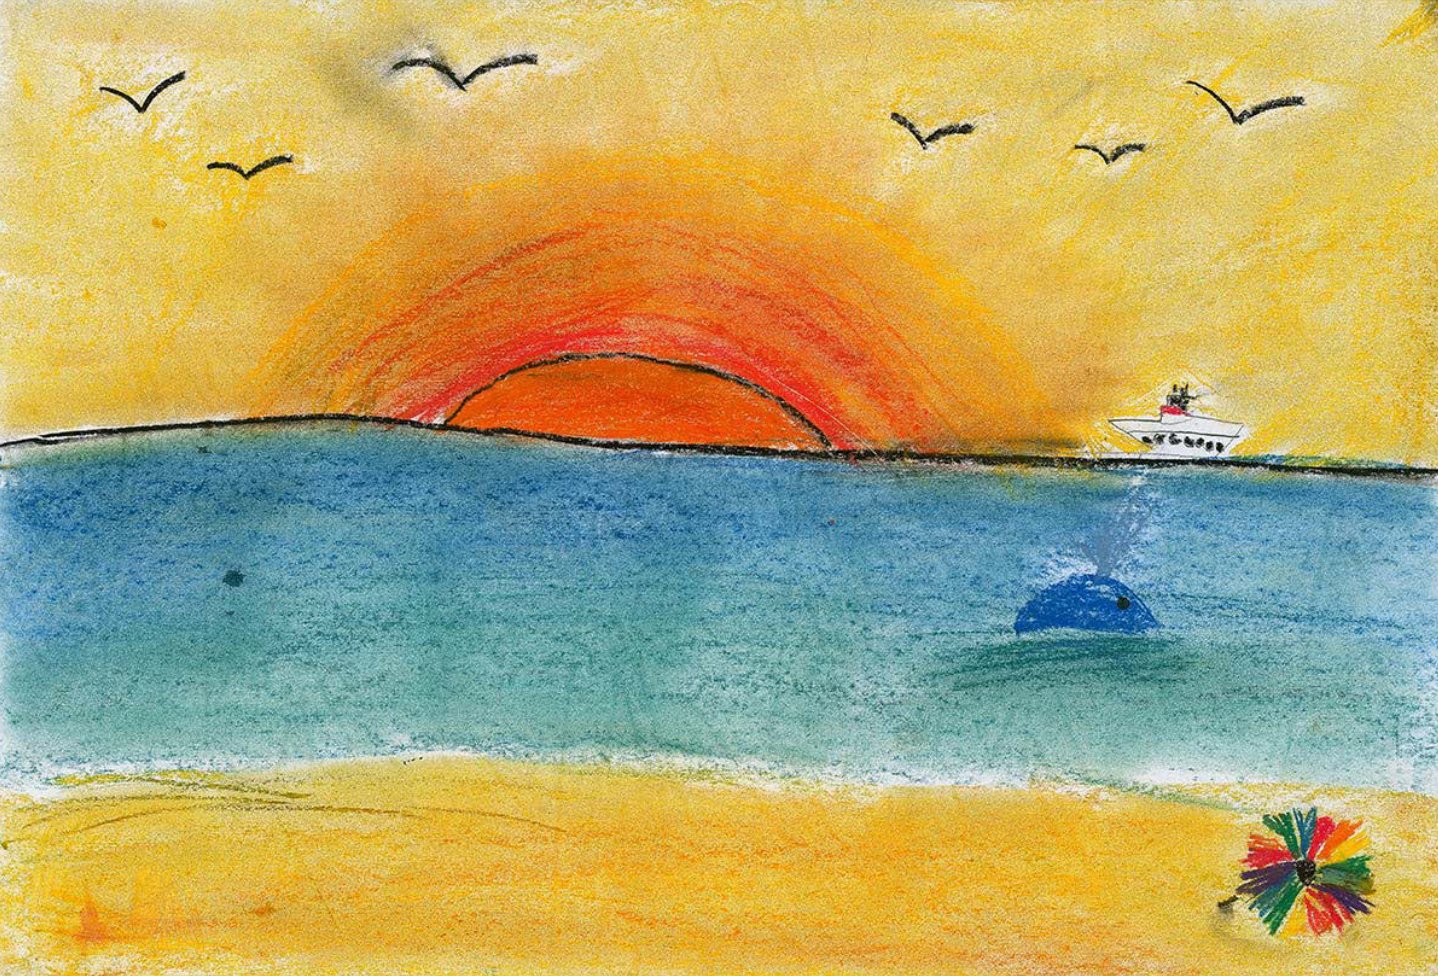 Nantucket New School second grader Nora Connely's winning entry in the Steamship Authority's Sail Into Imagination art contest.